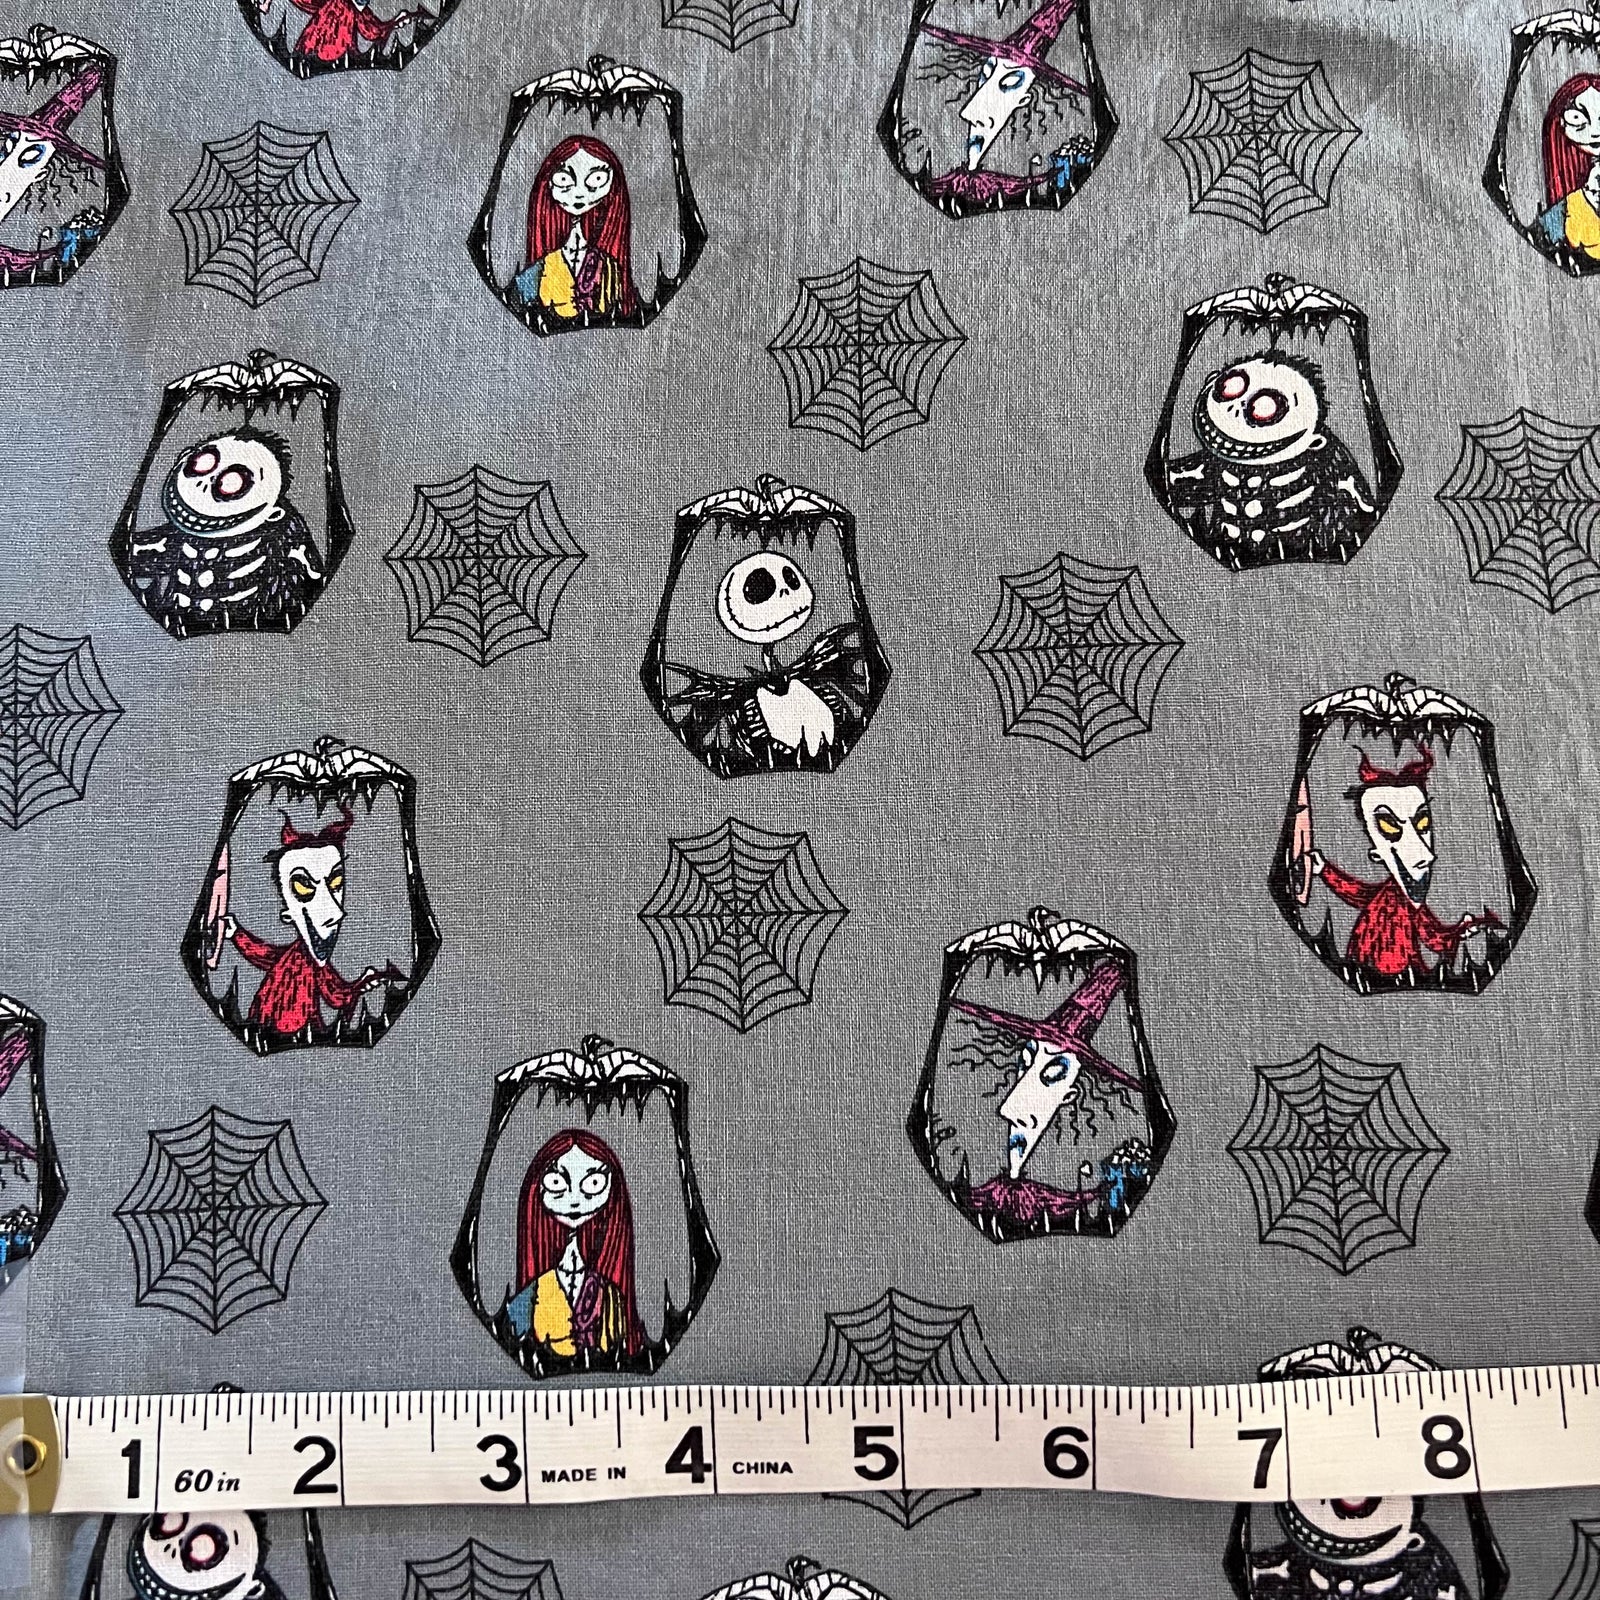 Nightmare Before Christmas Cast Character Badges Fabric - Out of Print - 1 yard